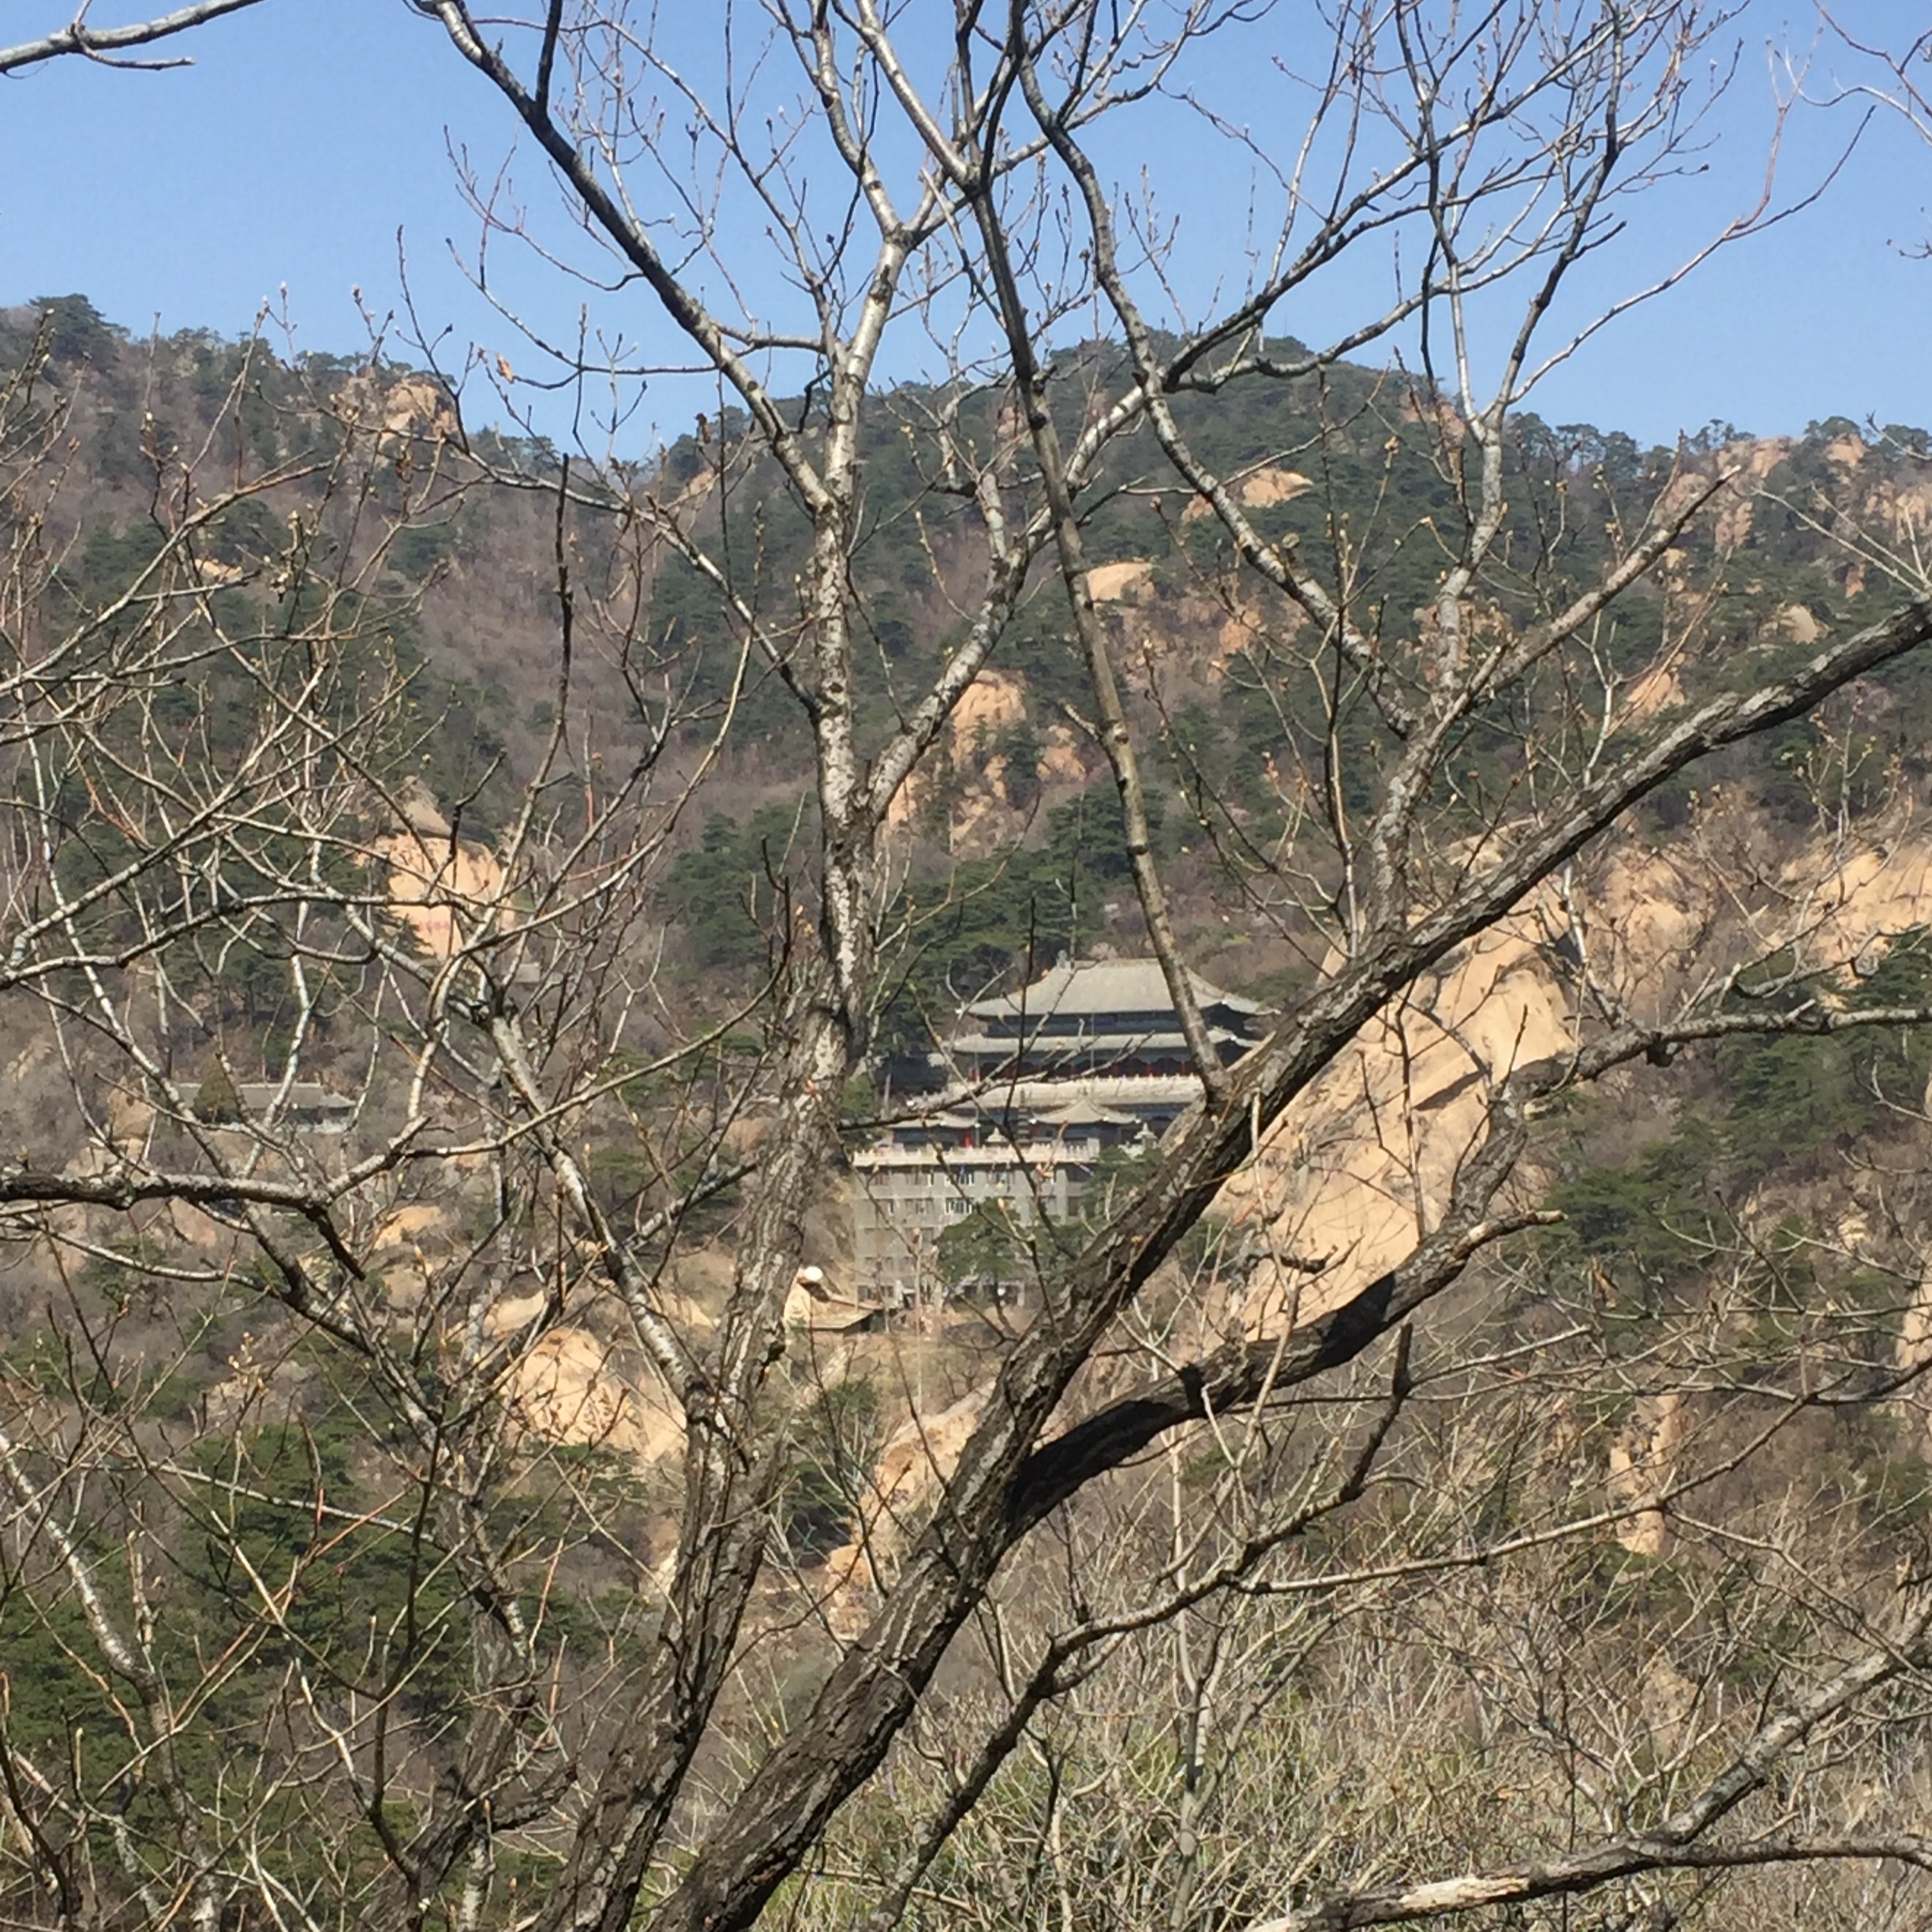 PICTURED: The Water Dragon Temple viewed from across the Peach Blossom Valley framed poorly by a poorly taken photo by yours truly.